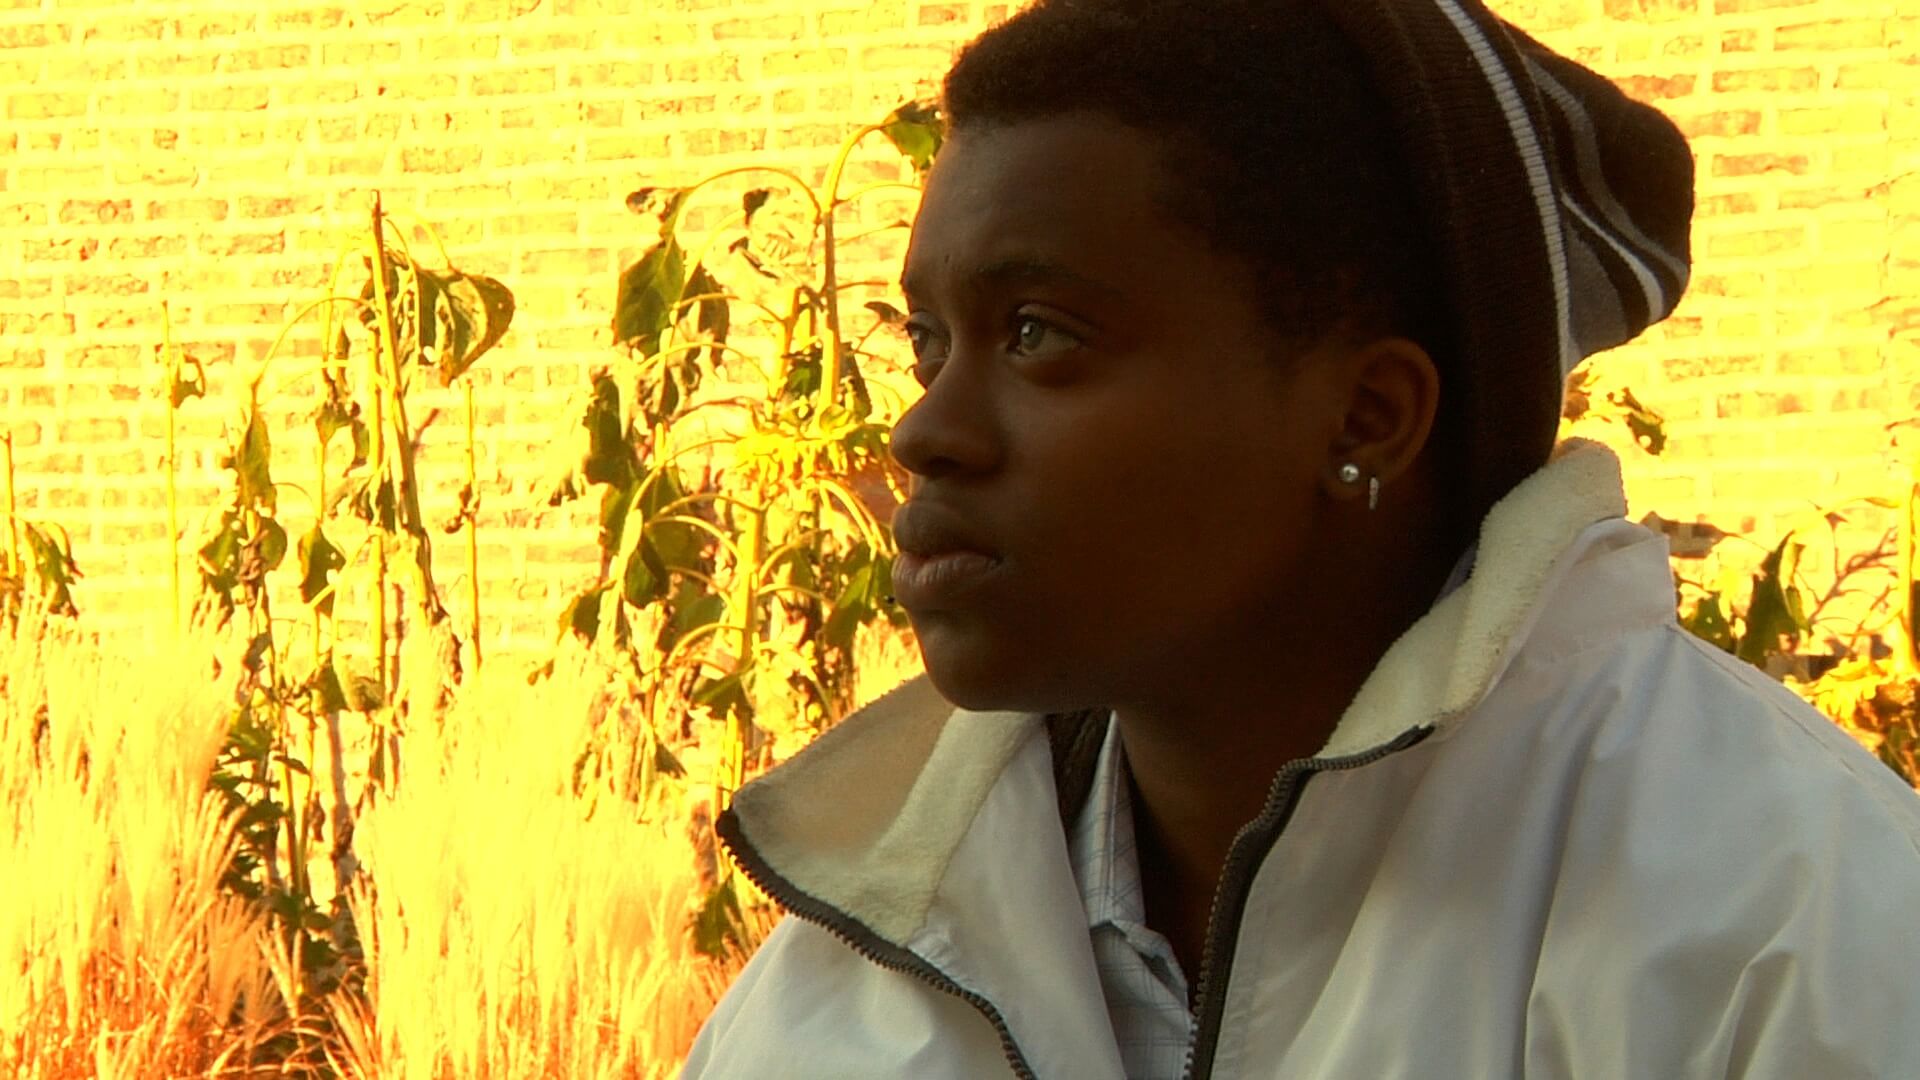 A still from The Homestretch. A close-up shot of a person in a white jacket and maroon beanie outside, in front of a brightly lit wall in the background. The wall appears yellow from the bright sun.